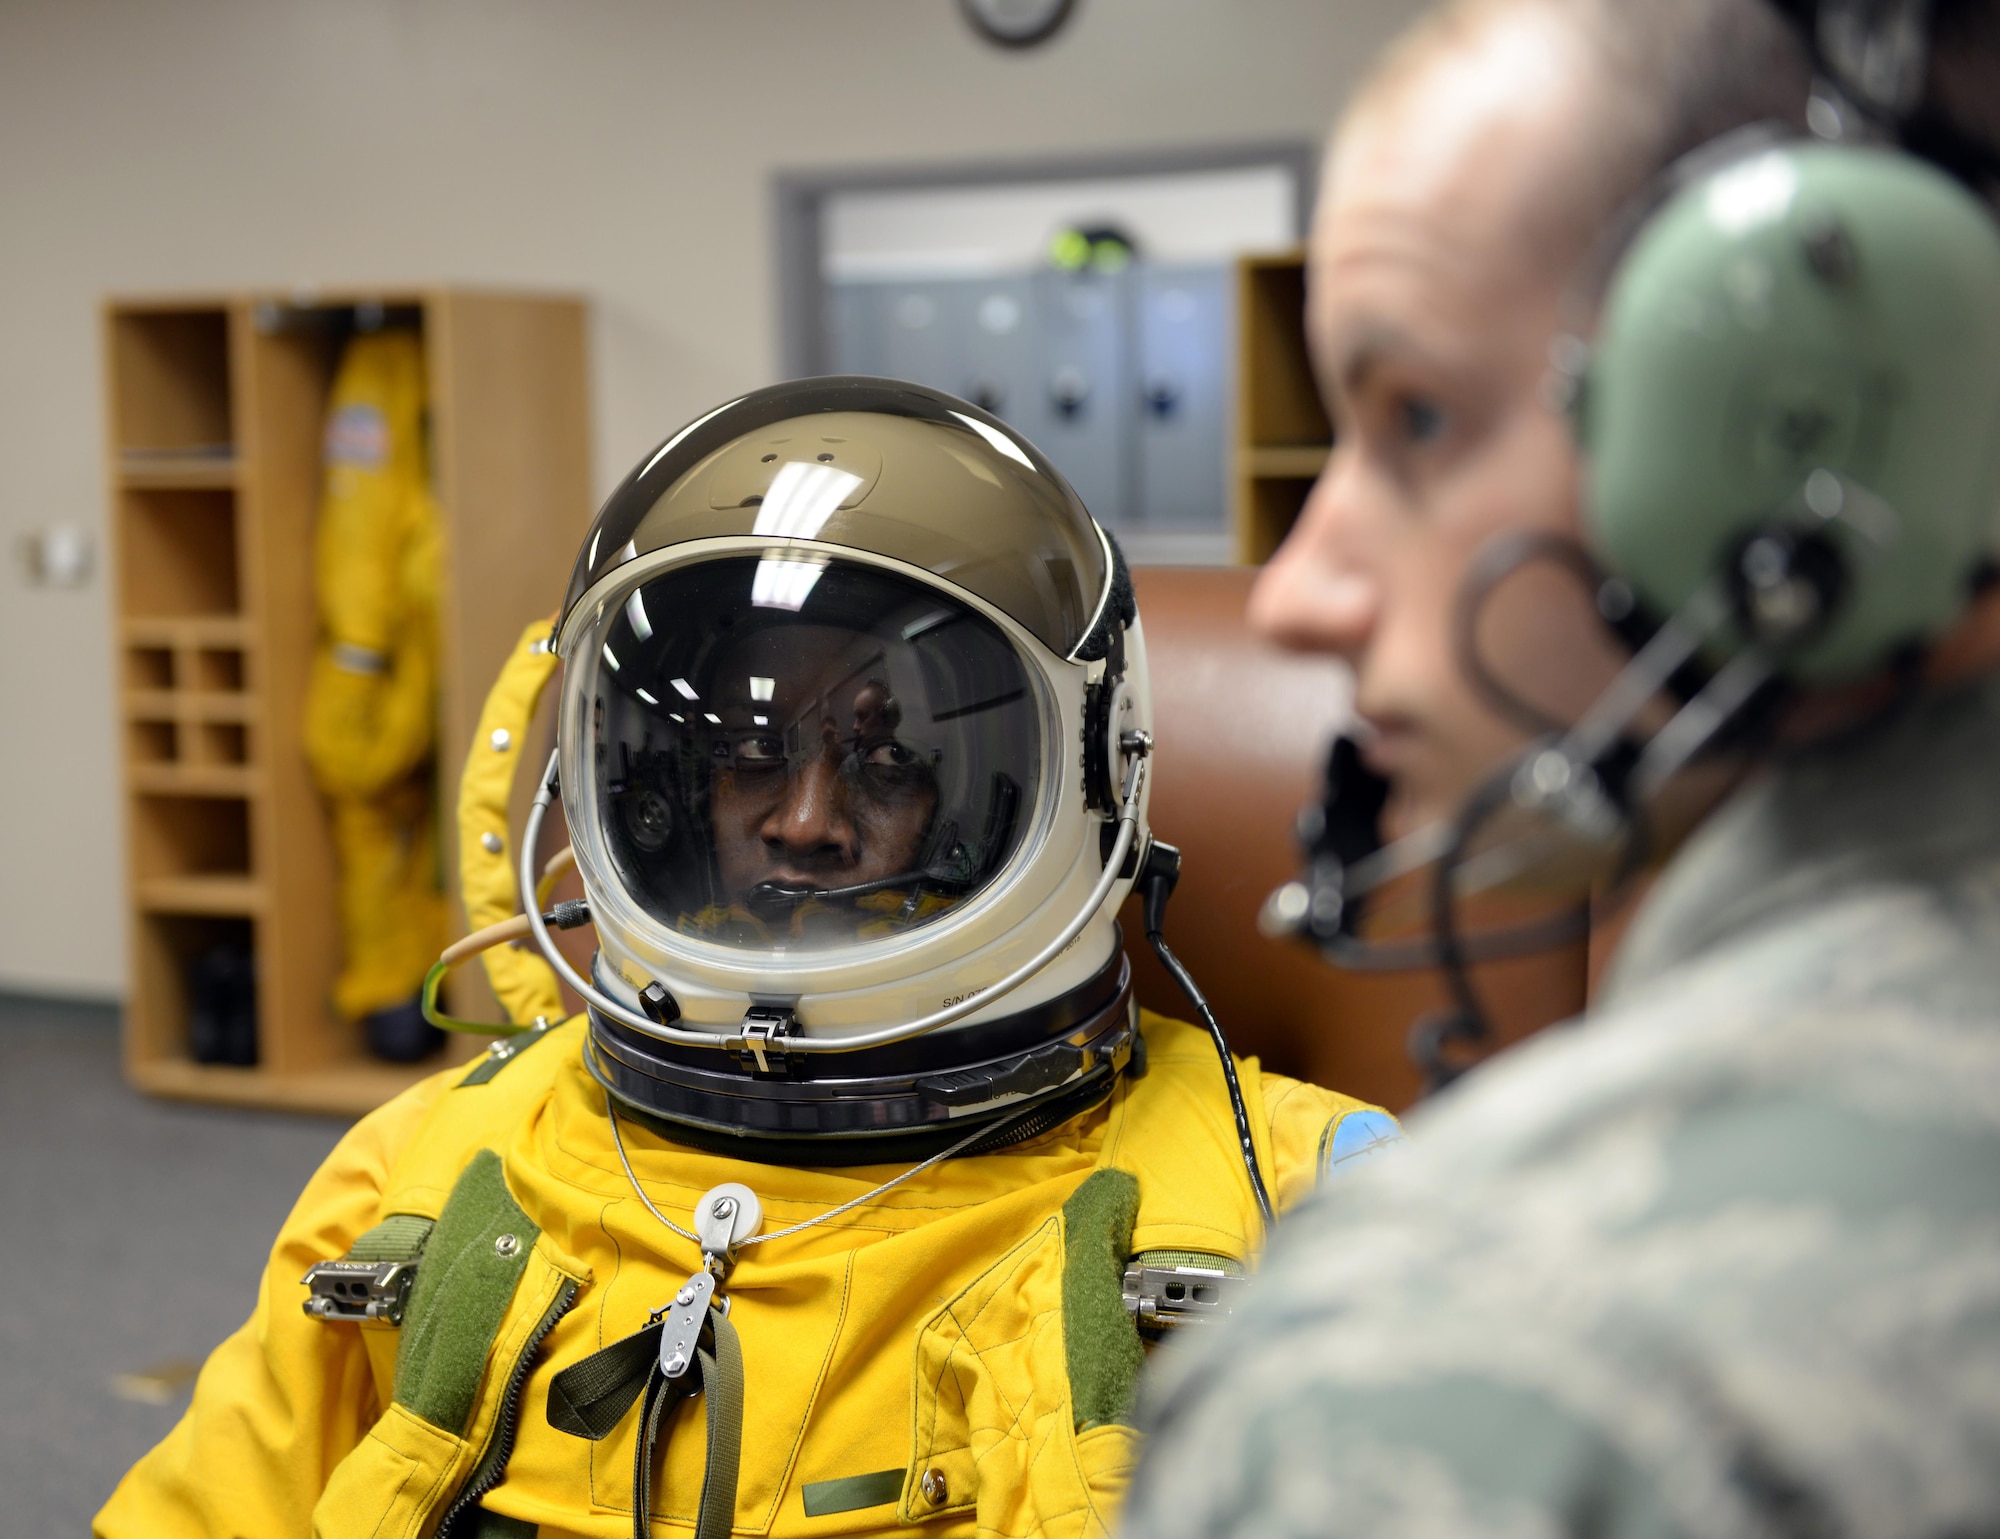 Lt. Col. Merryl Tengesdal receives a maintenance check on her full pressure suit by Senior Airman Garret McNeely in preparation to take flight in a U-2 Feb. 9, 2015 at Beale Air Force Base, Calif. Tengesdal is the 9th Reconnaissance Wing inspector general and a U-2 pilot. McNeely is a 9th Physiological Support Squadron aerospace physiology technician. (U.S. Air Force photo/Senior Airman Bobby Cummings)